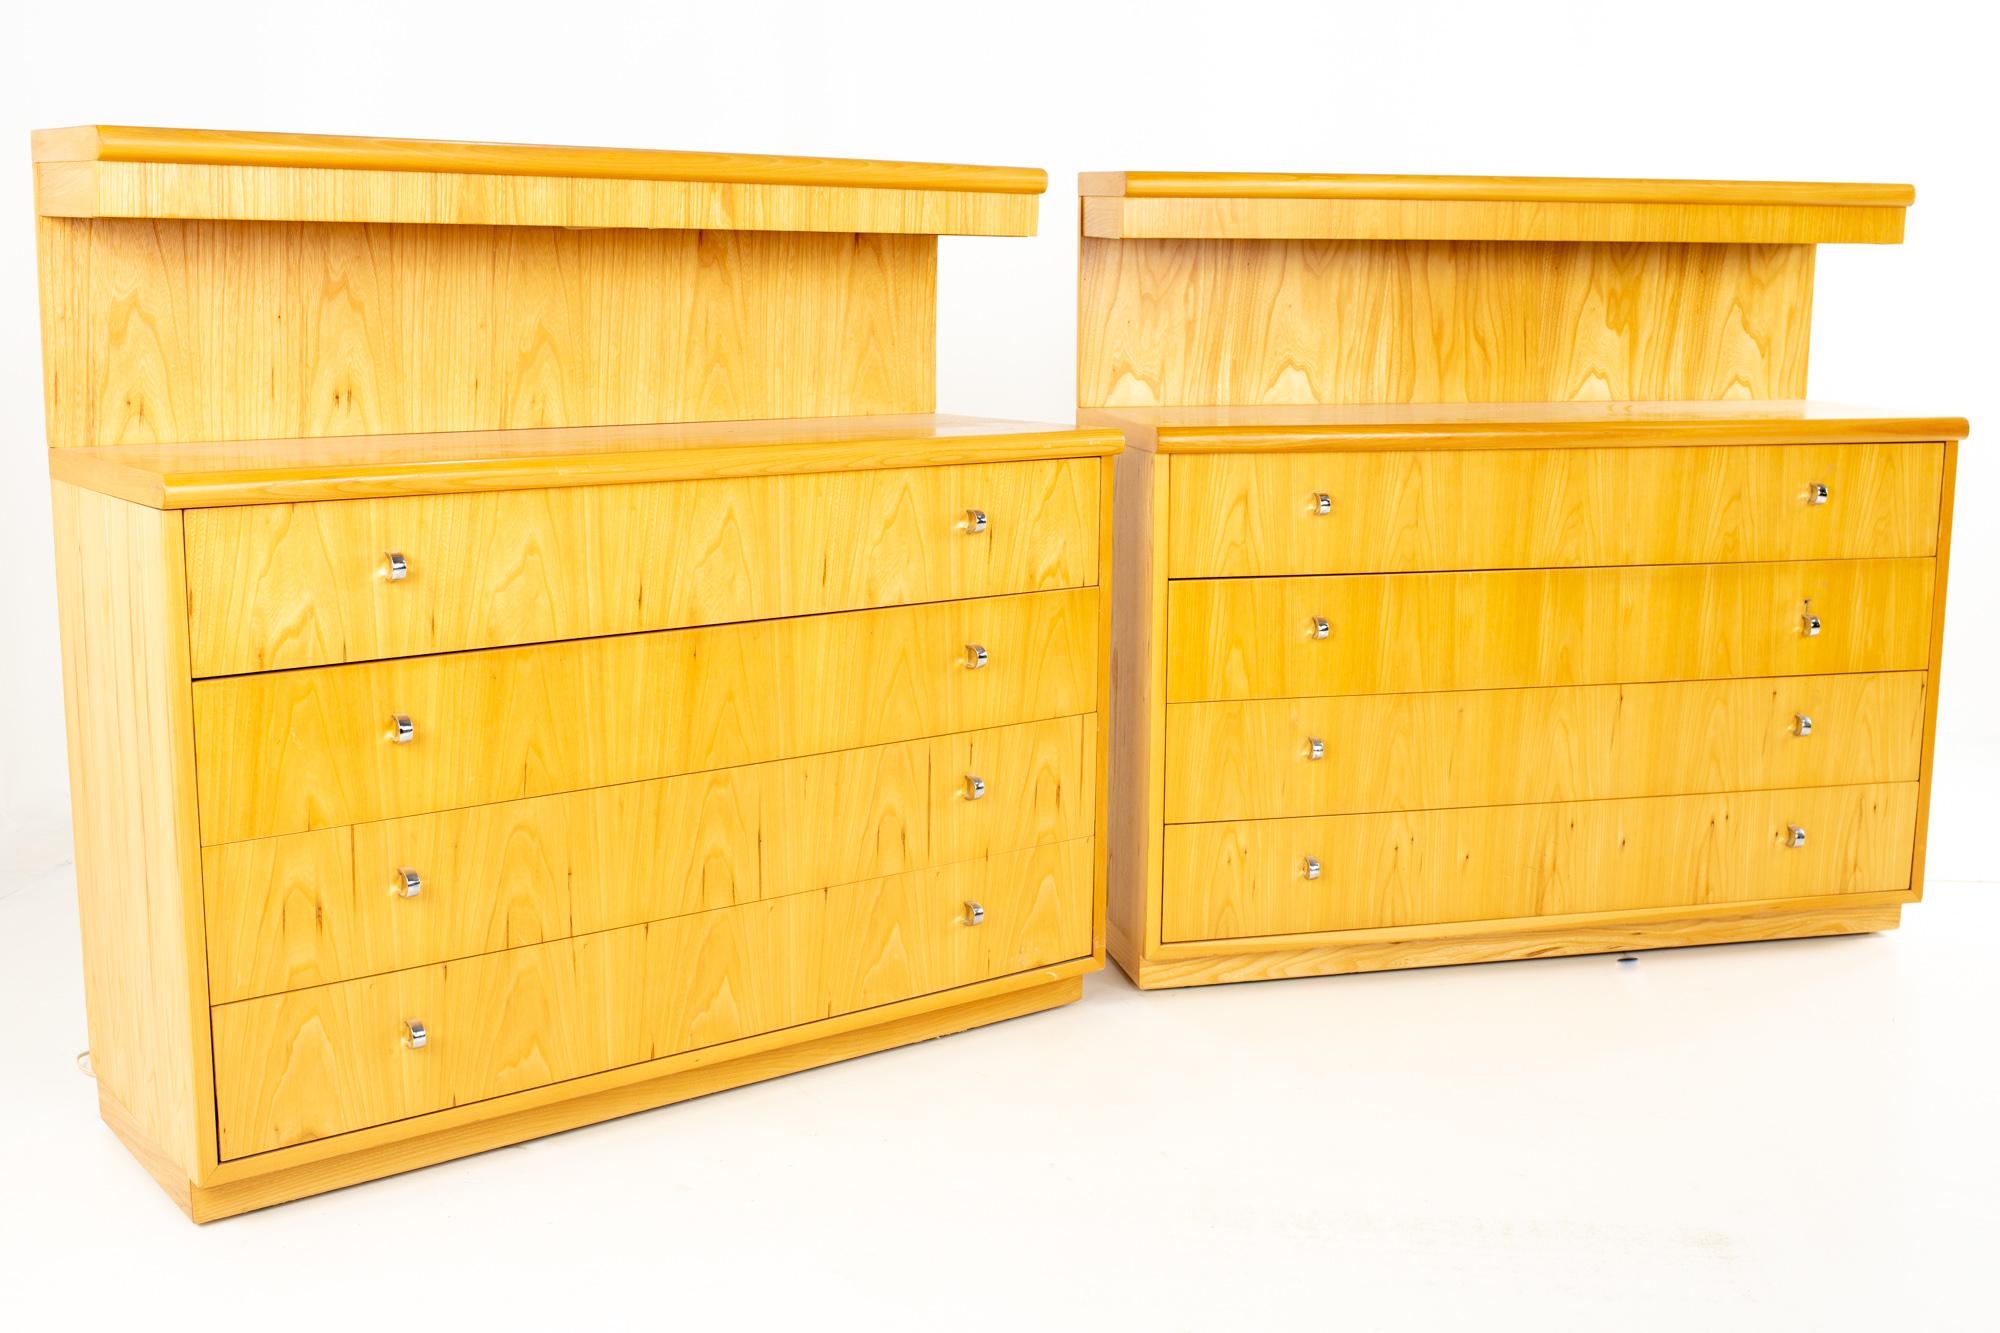 Jack Cartwright for Founders mid century blonde oak lighted 4-drawer shallow dresser chest - pair

Each chest measures 43.5 wide x 15.75 deep x 40.5 high

Can be sold as a single dresser. Lighted upper section is removable.

This price includes